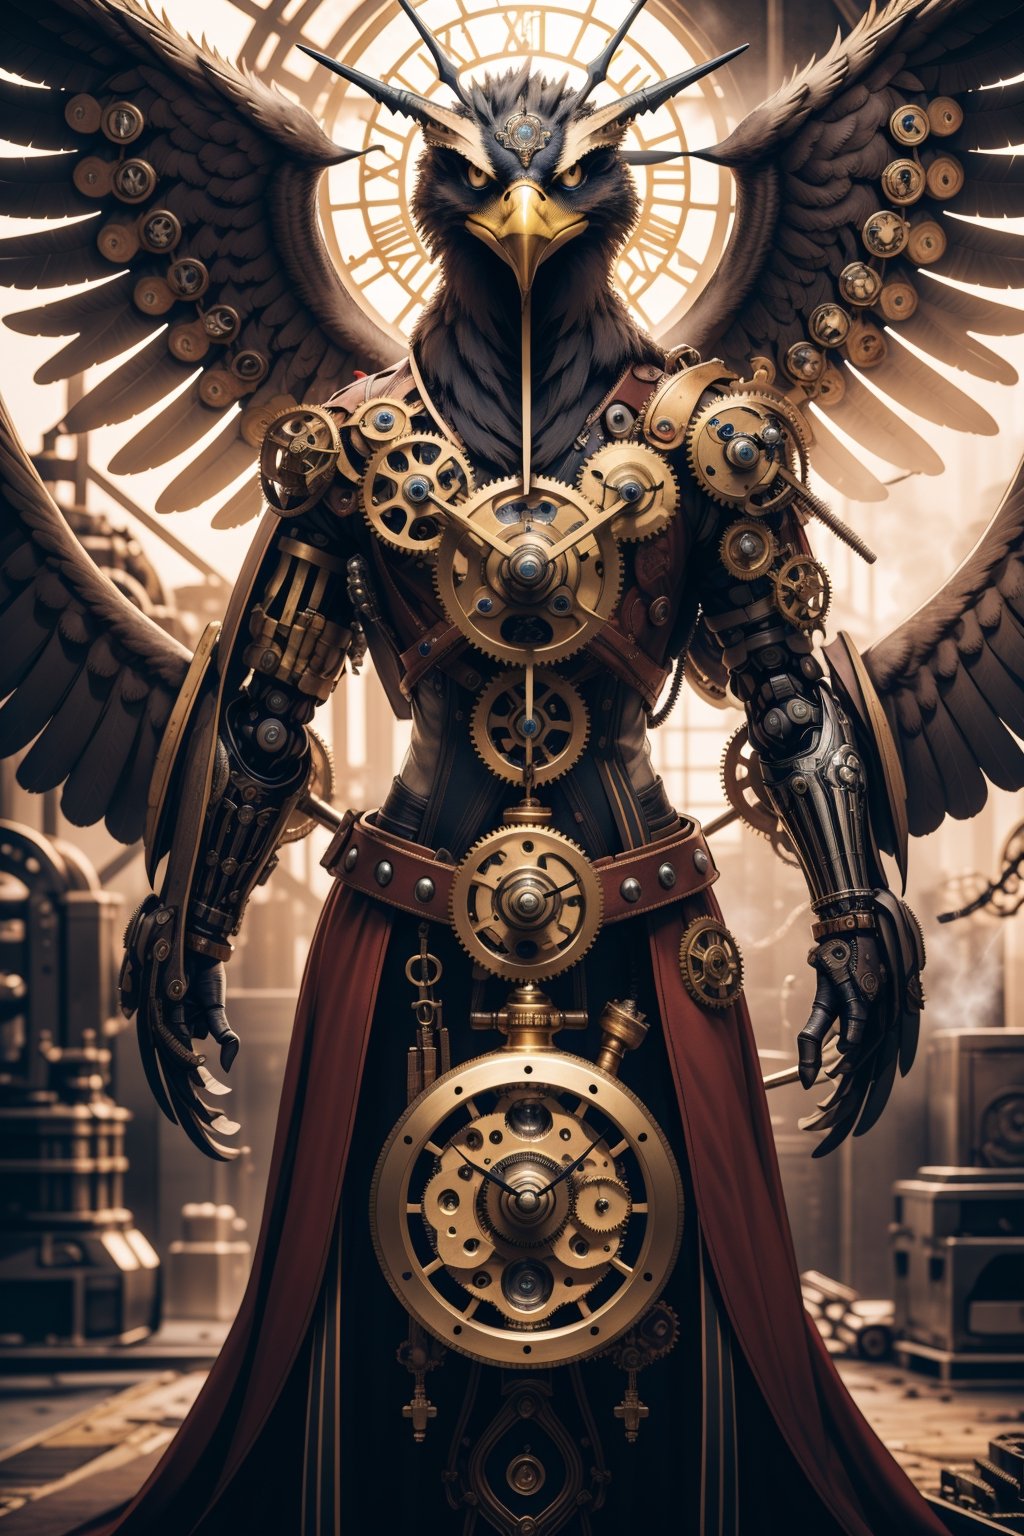 Generates an image of a majestic Steampunk-style robot eagle. Its body is meticulously constructed using intricate clockwork mechanisms, with gears and bronze parts forming its structure. Its rusted metal wings spread elegantly, displaying details of rivets and steam pipes. His eyes shine with an intense golden light, while his beak is adorned with brass ornaments. The eagle stands in an imposing pose, as if it is about to take flight into the steamy skies of a Steampunk city,mechanical